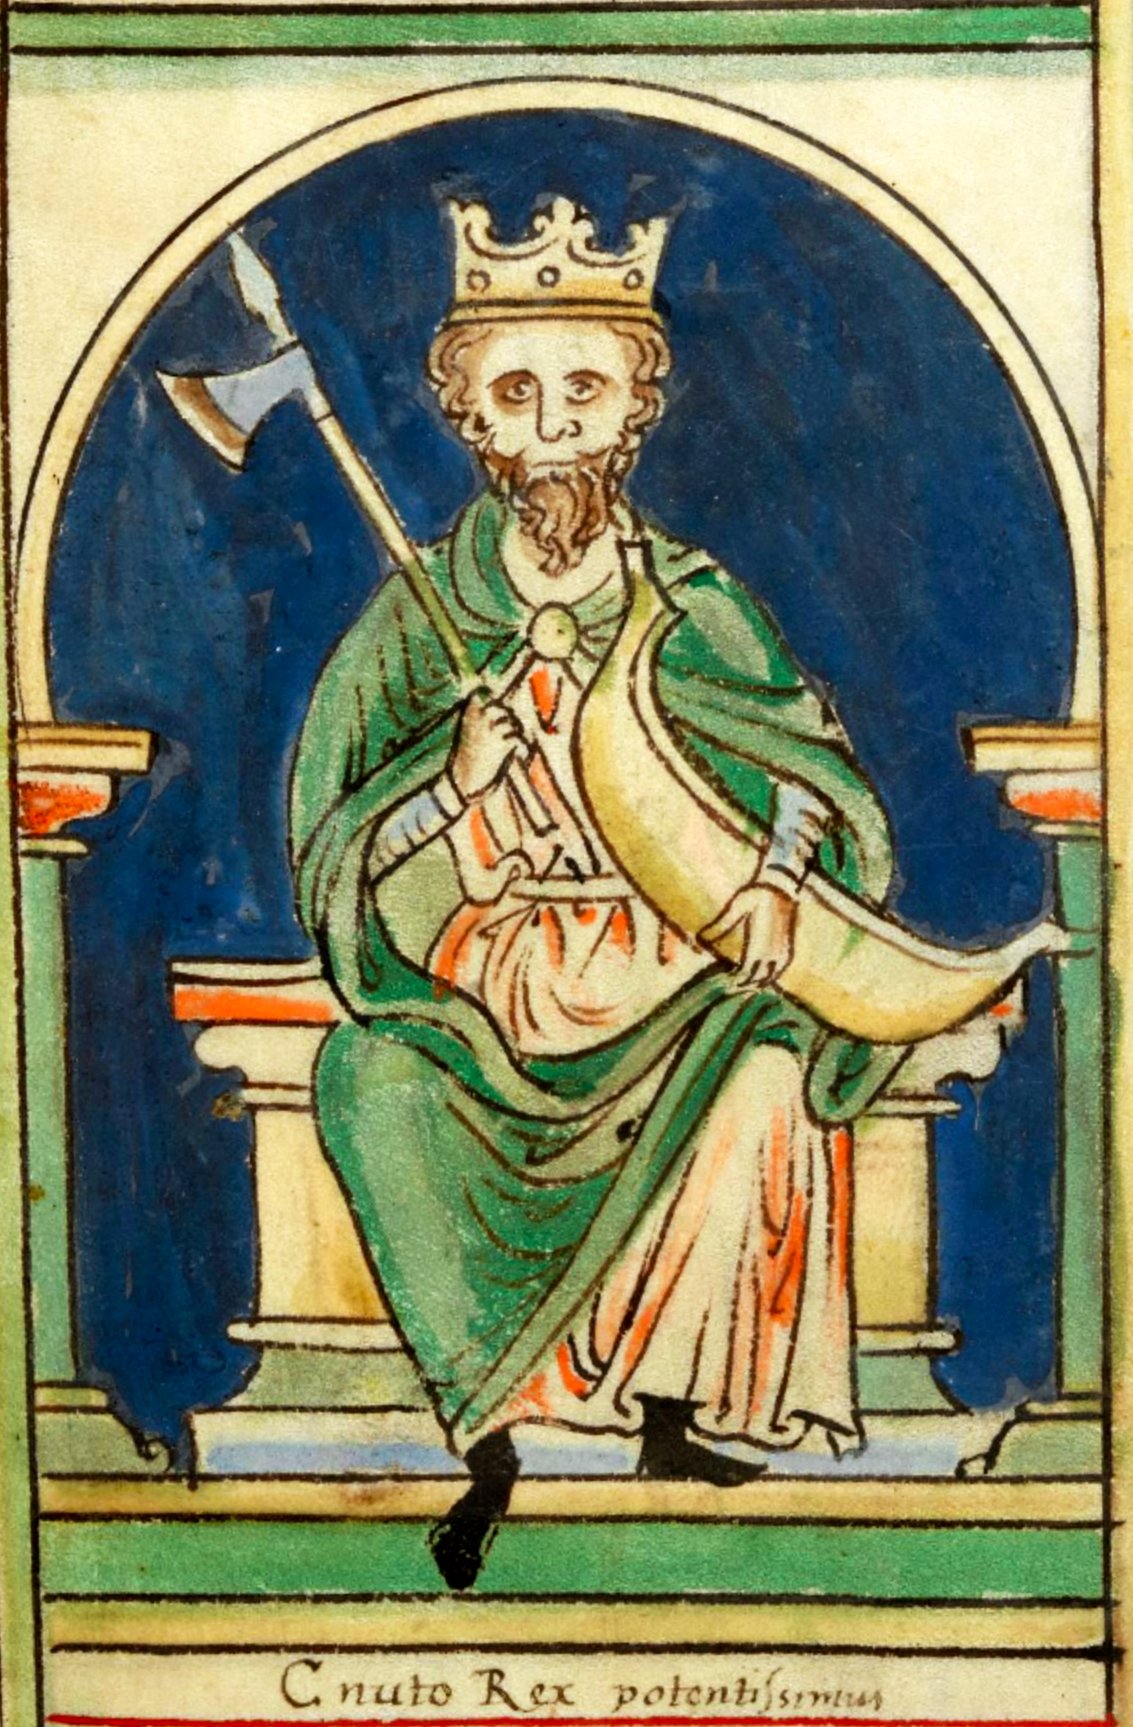 A medieval illustration of king Cnut the Great sitting on a throne with a viking boat and an axe in a blue and green background.